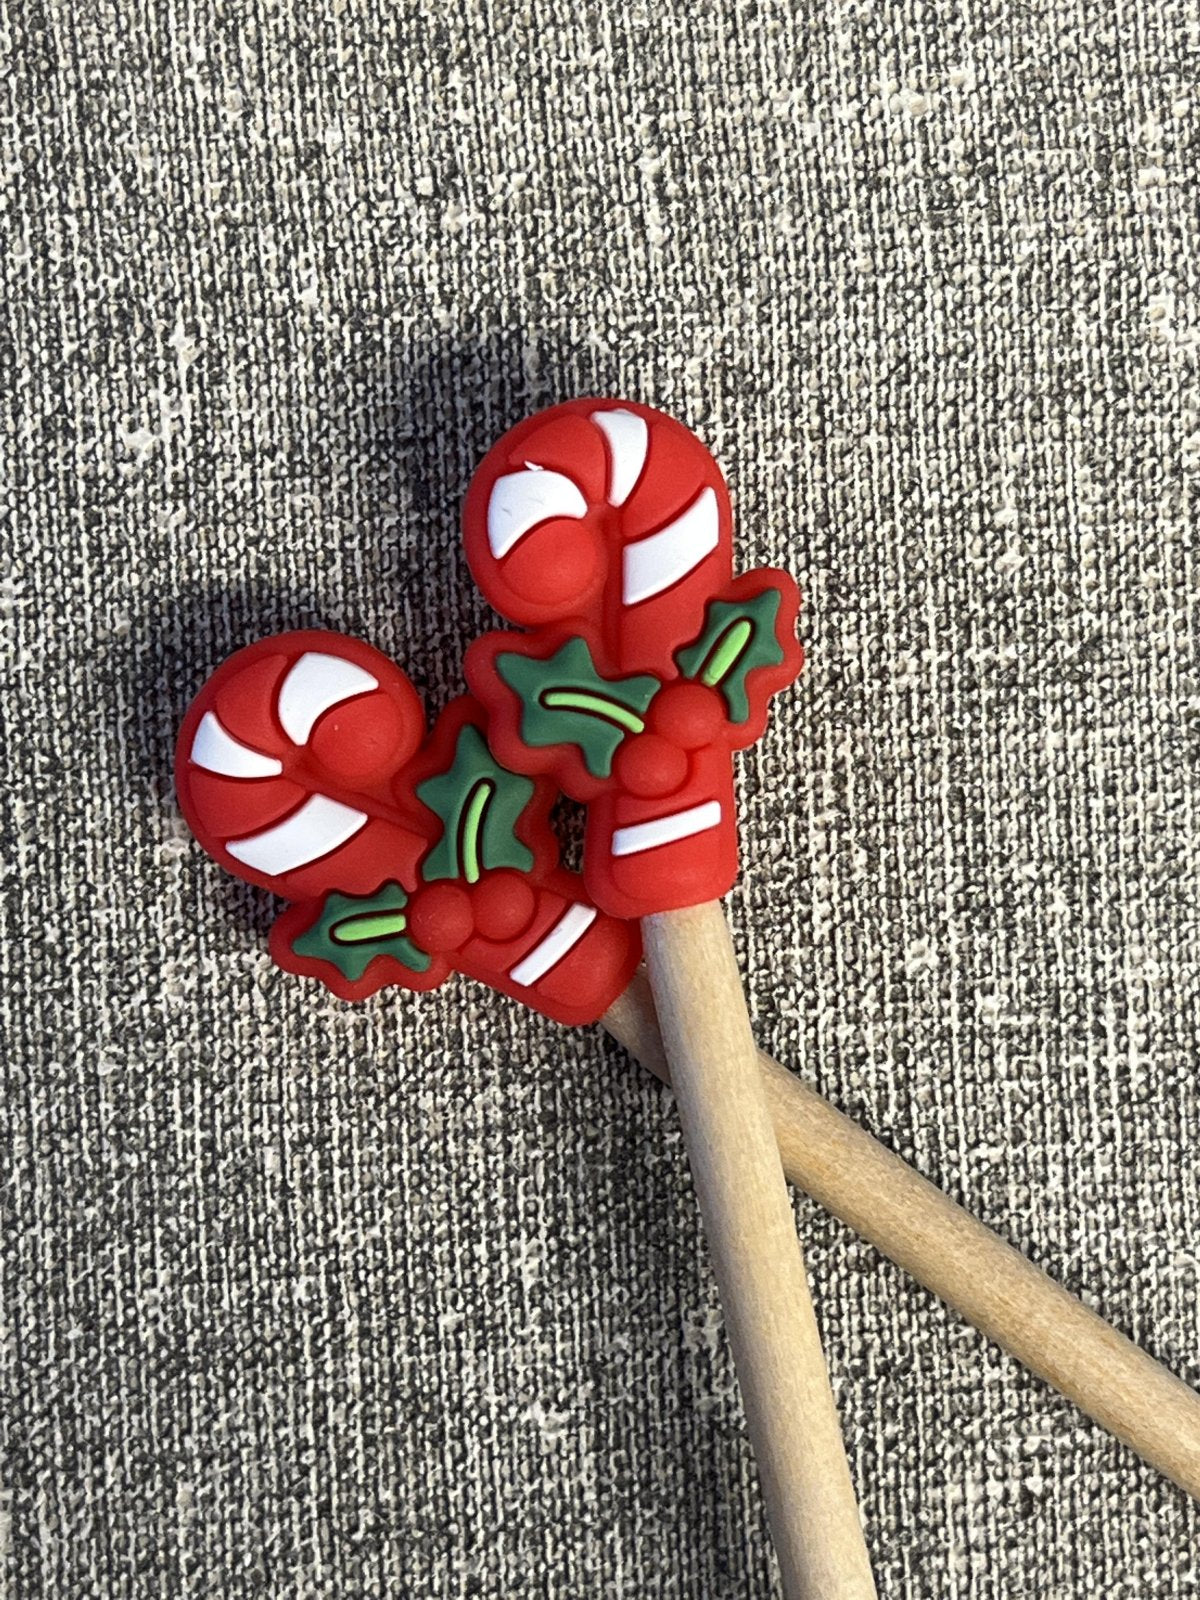 Minnie & Purl; Stitch Stoppers; candy canes